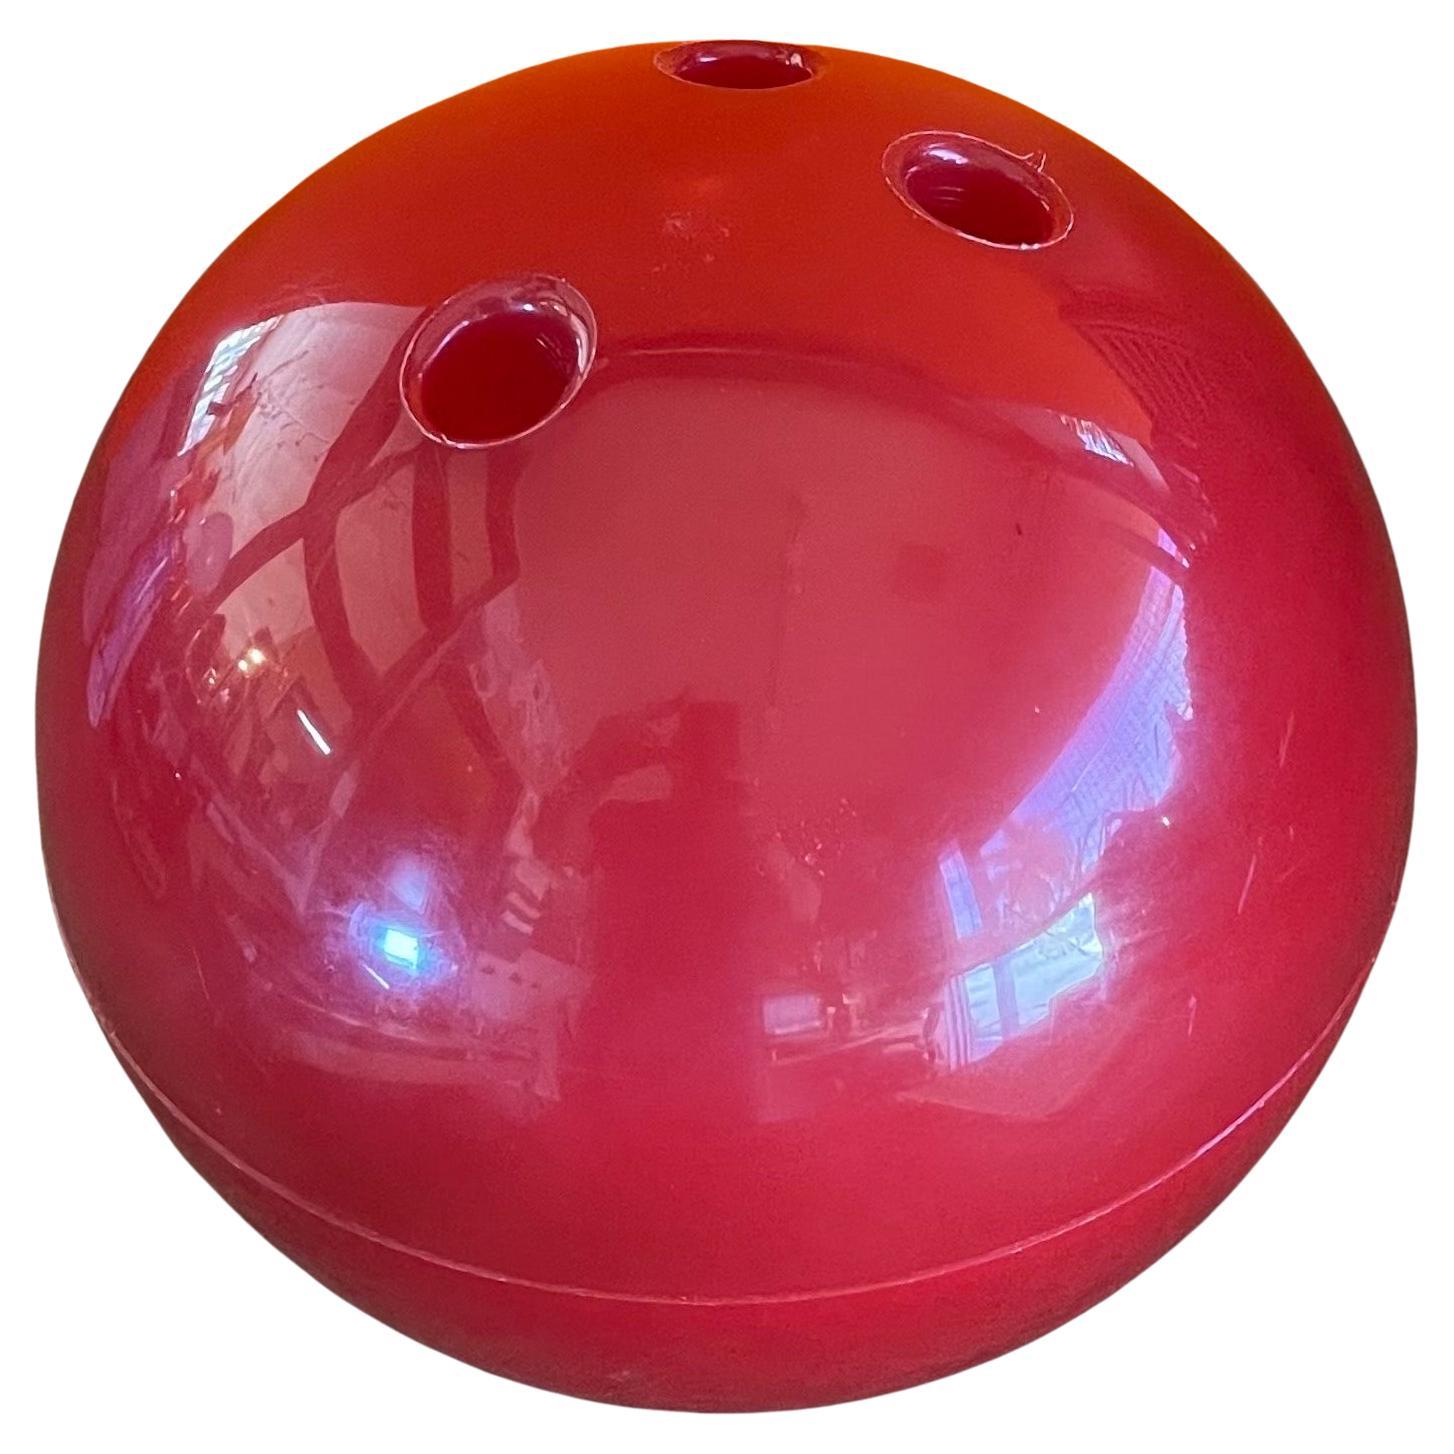 https://a.1stdibscdn.com/mid-century-modern-red-ice-a-bowl-bowling-ball-ice-bucket-by-victor-bonomo-for-sale/f_9366/f_355791421691378868488/f_35579142_1691378869044_bg_processed.jpg